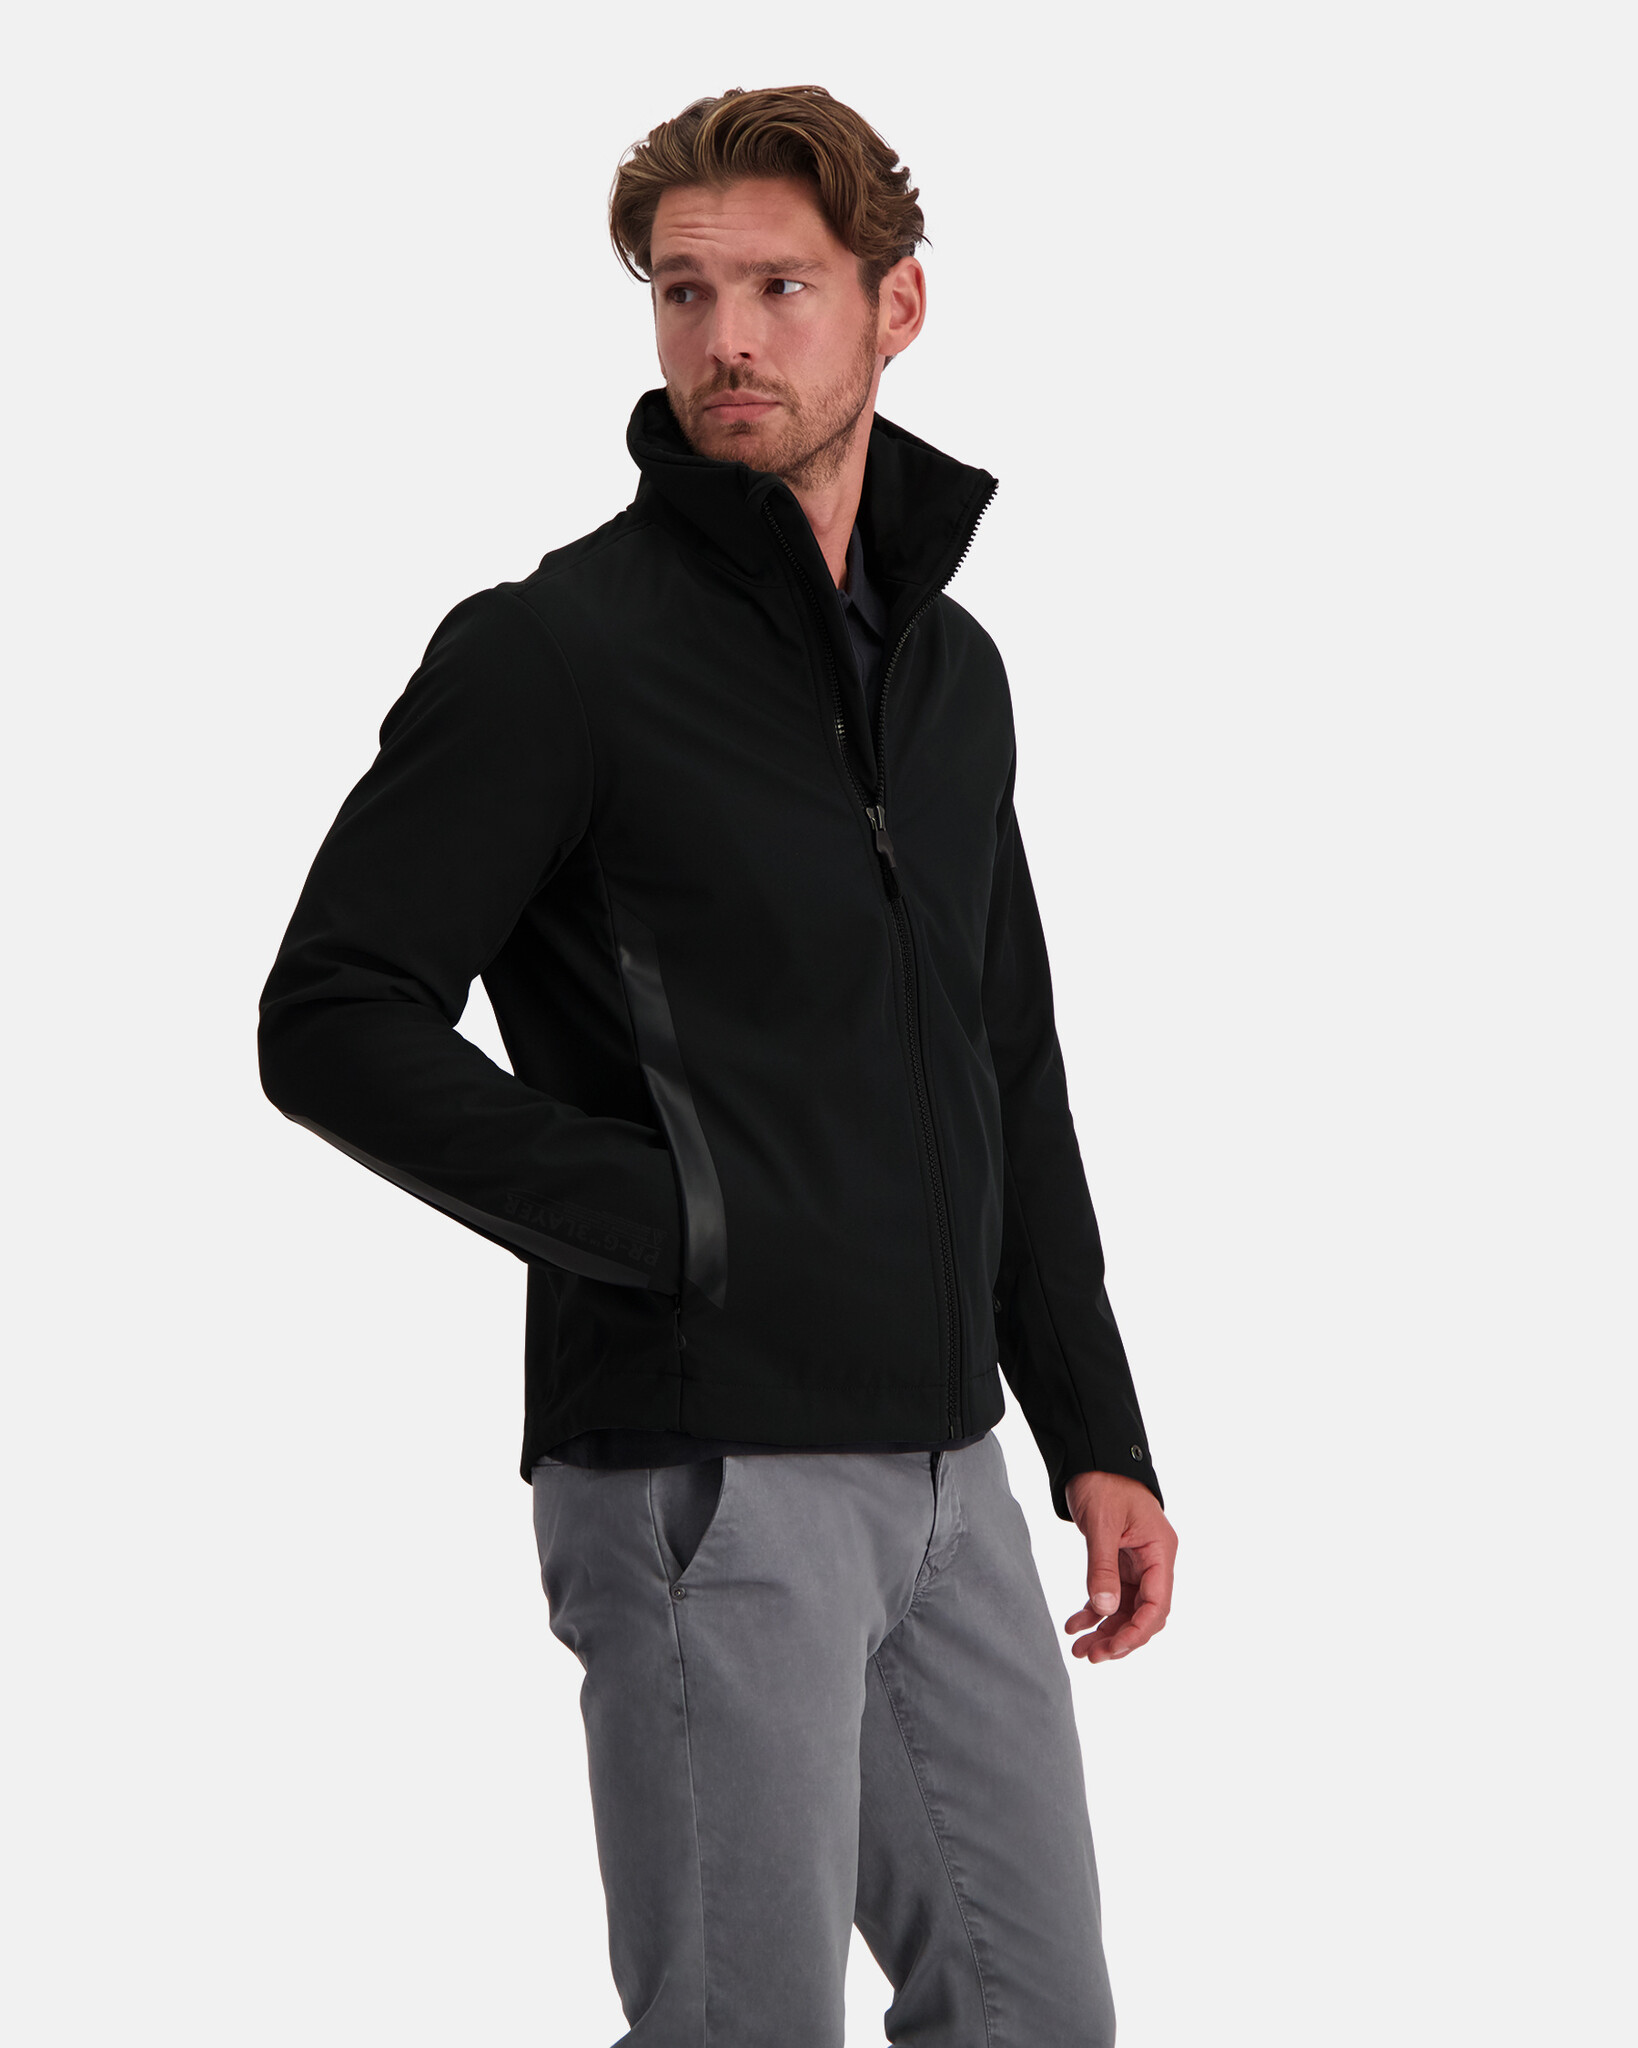 3Layer, water repellent, windproof and breathable soft shell jacket for medium protection